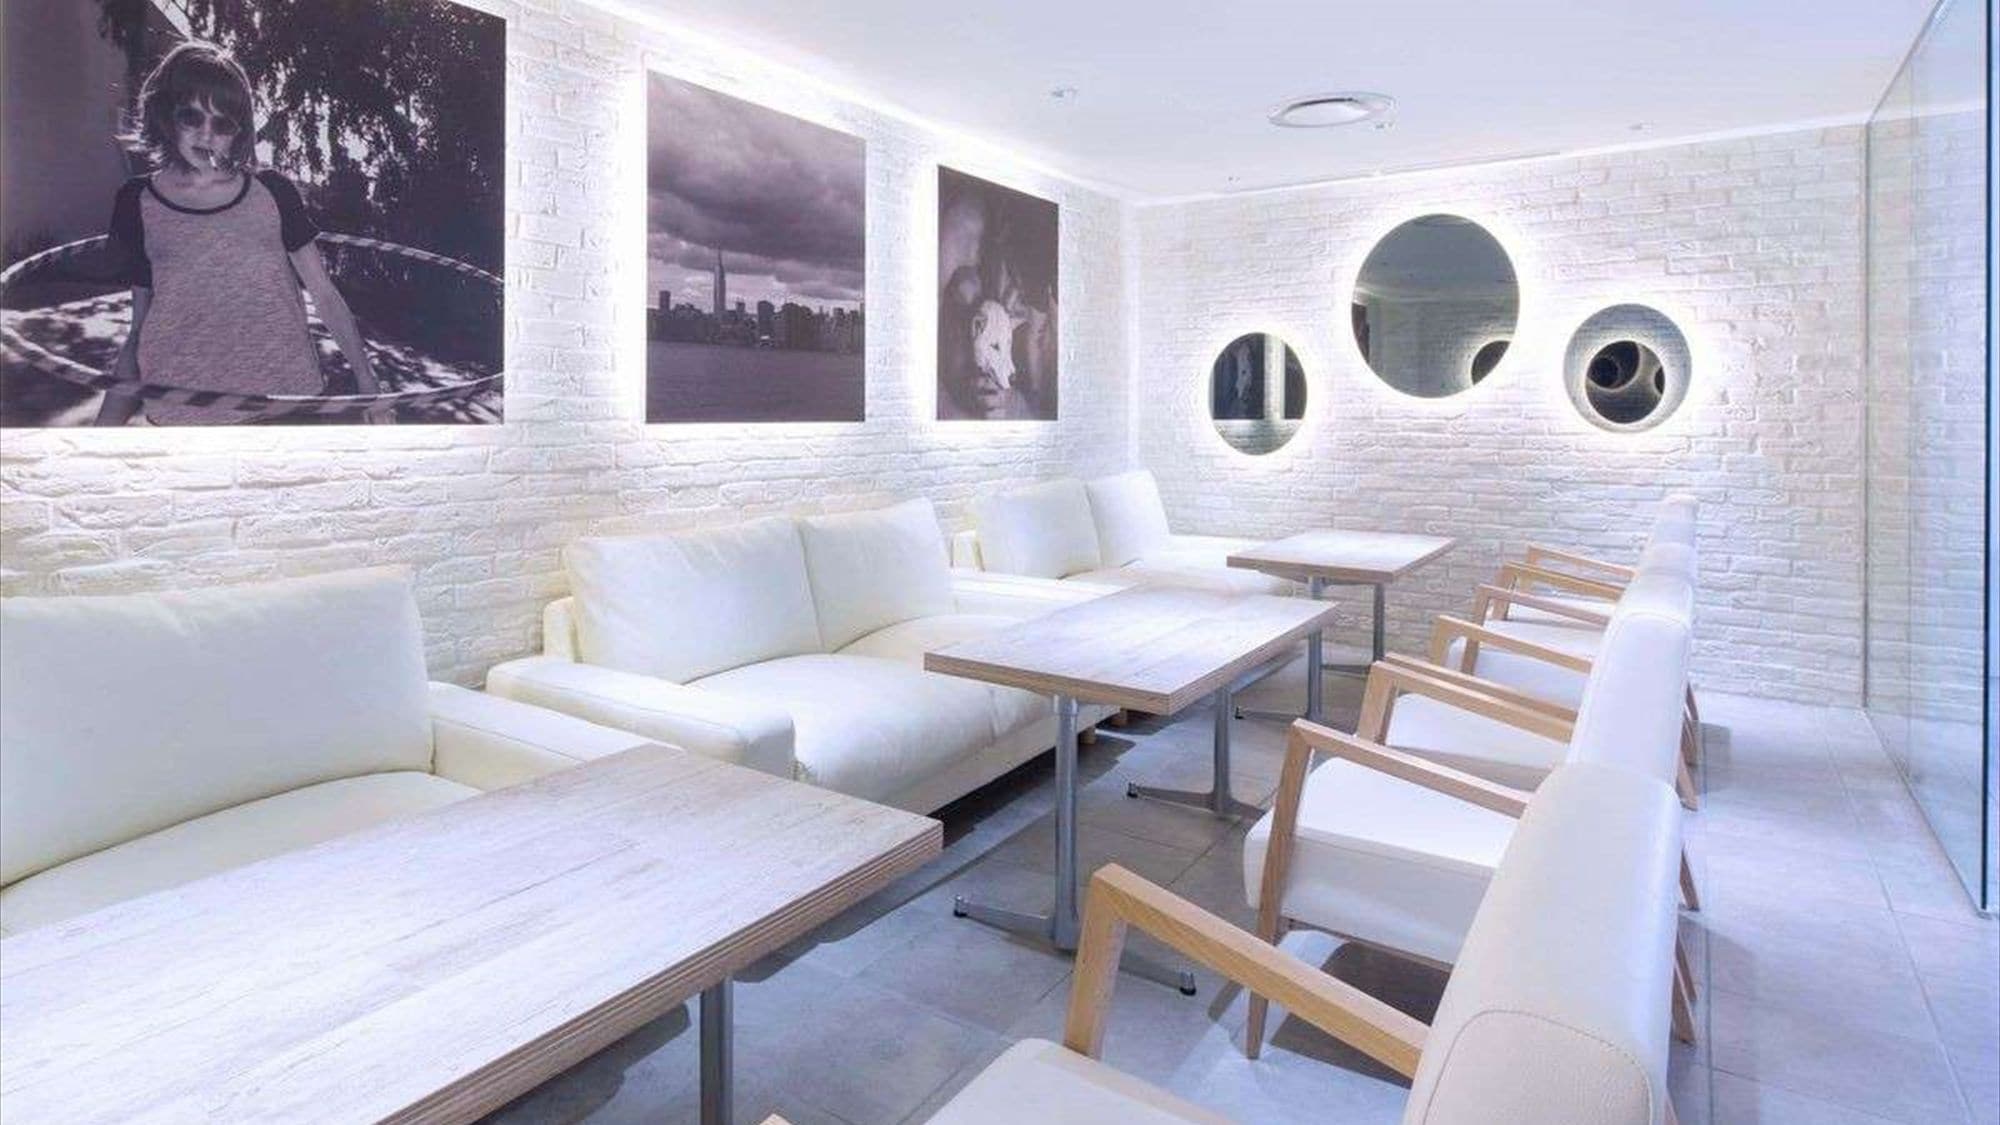 [Inside the cafe] The seats in the completely private room are comfortable with sofa seats.